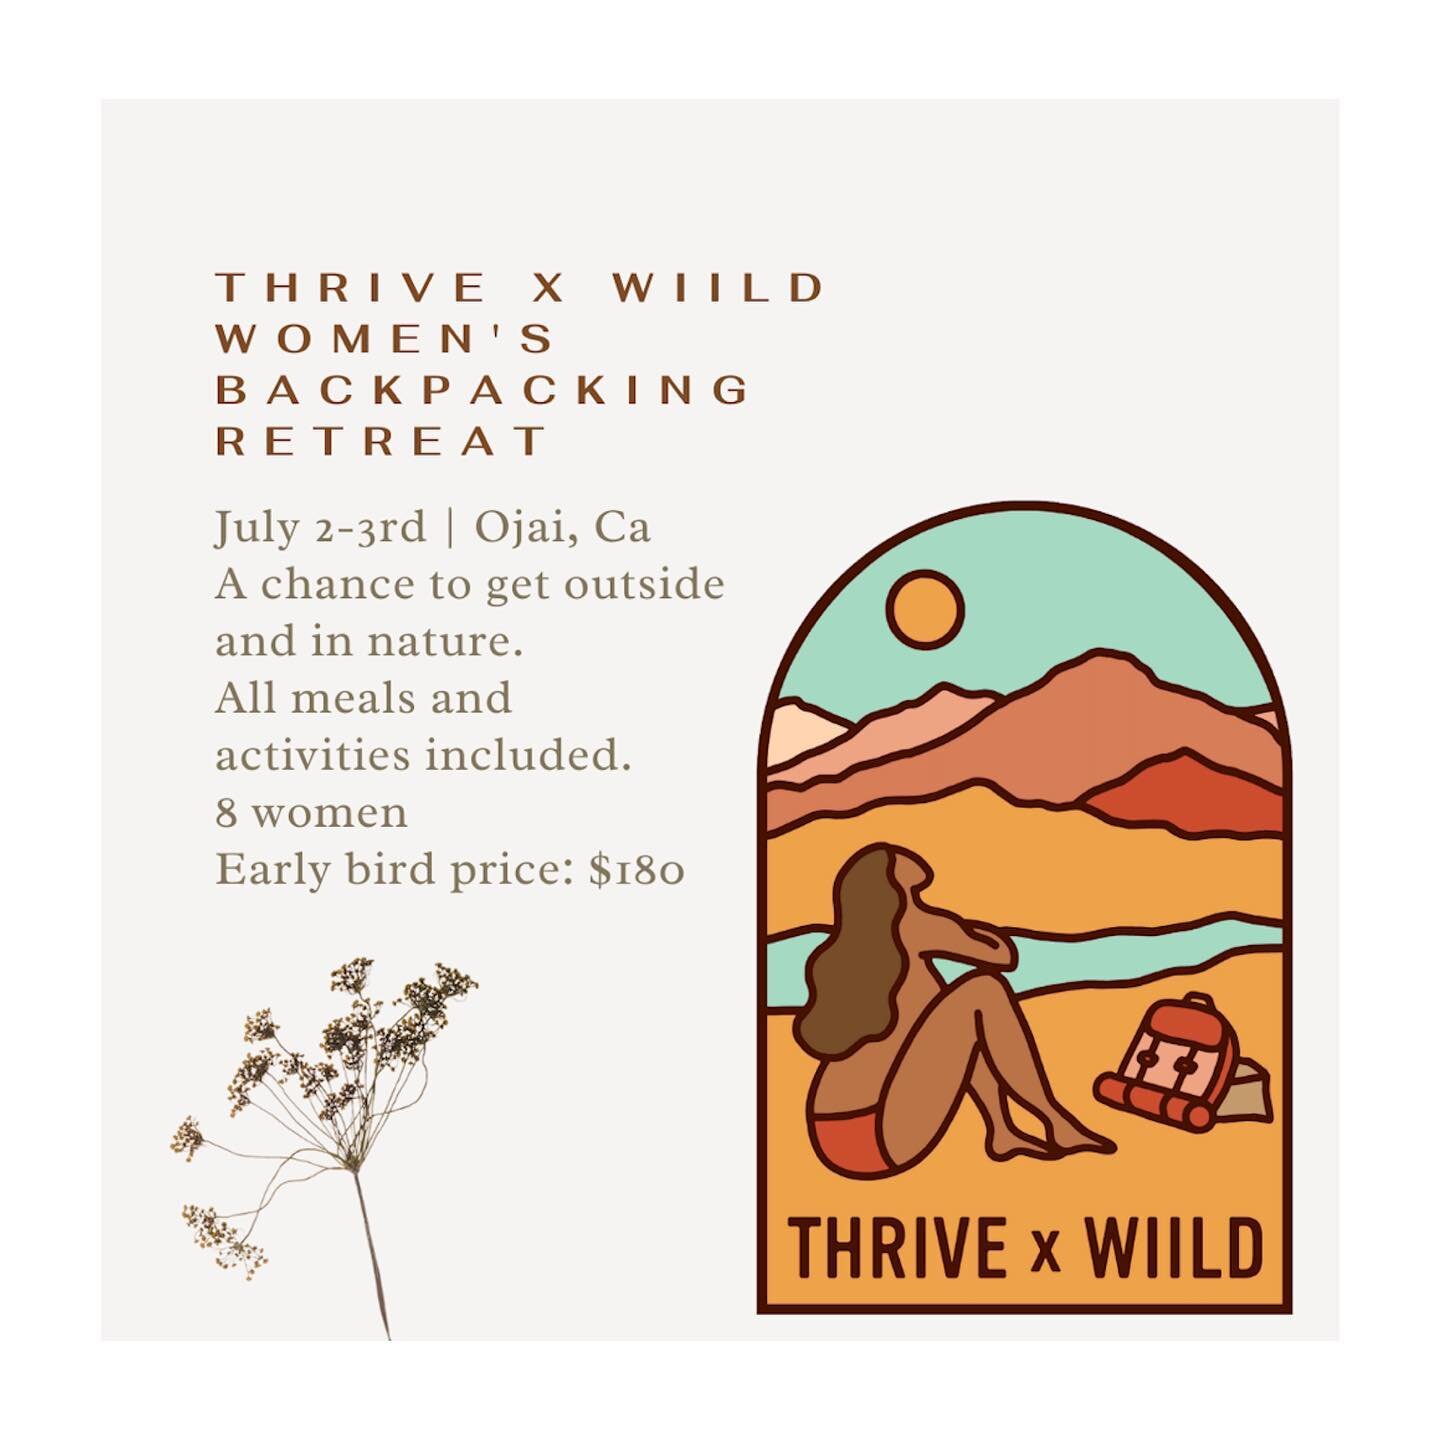 SO EXCITED TO ANNOUCE our next BACKPACKING RETREAT! 

In partnership with @thrive_wellness_workshop this retreat will be full of unwinding, relaxing and dropping in. 

Very limited spots. Email us to reserve yours: thrivexwiild@gmail.com